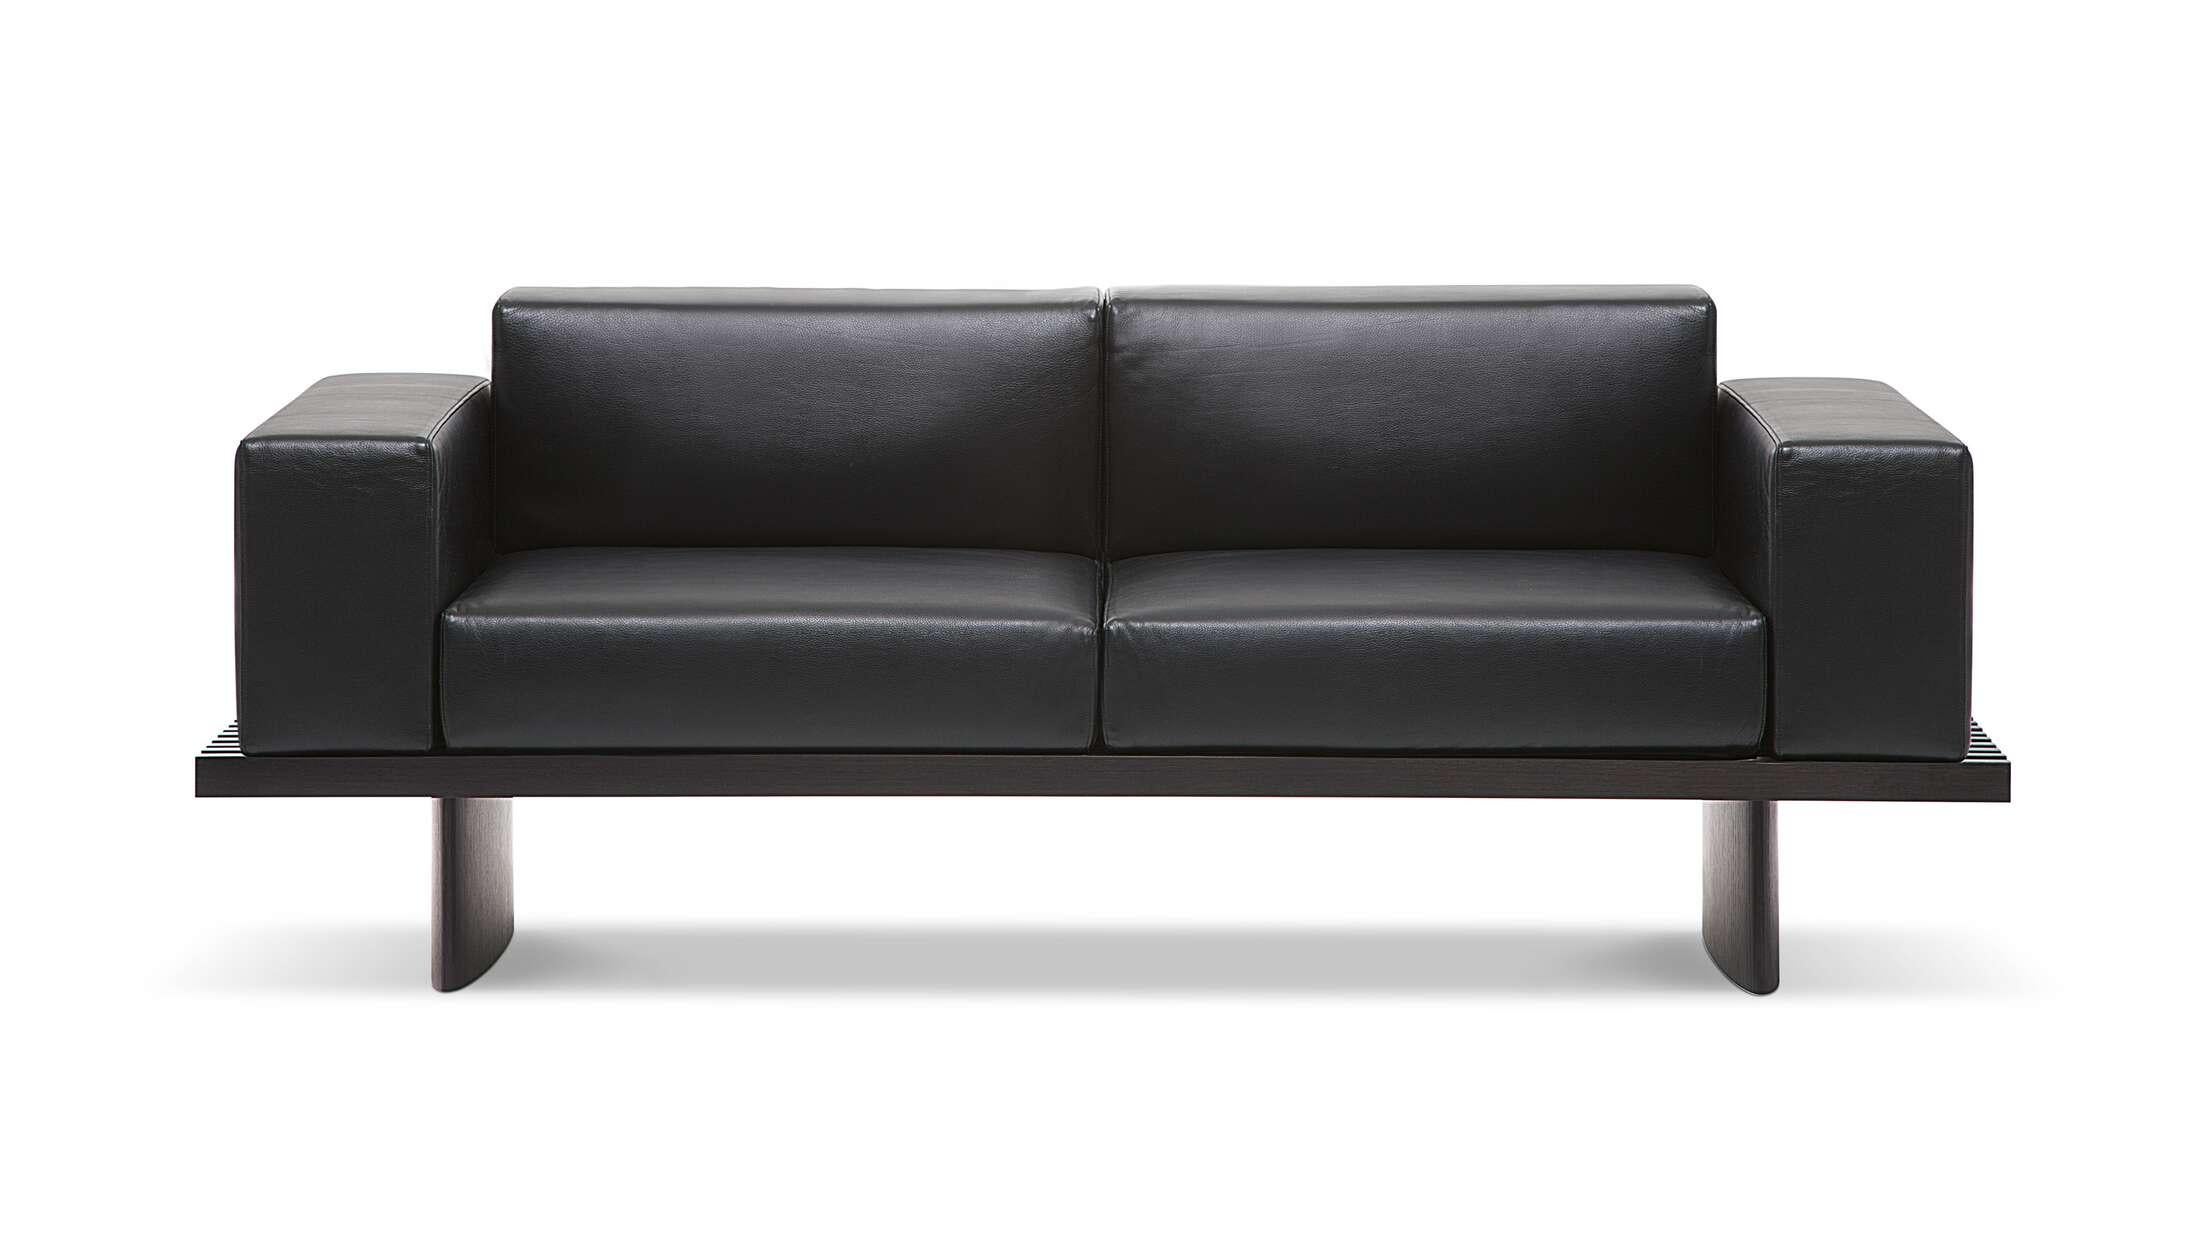 Mid-Century Modern Charlotte Perriand Refolo Sofa in Black Leather for Cassina, Italy - new For Sale